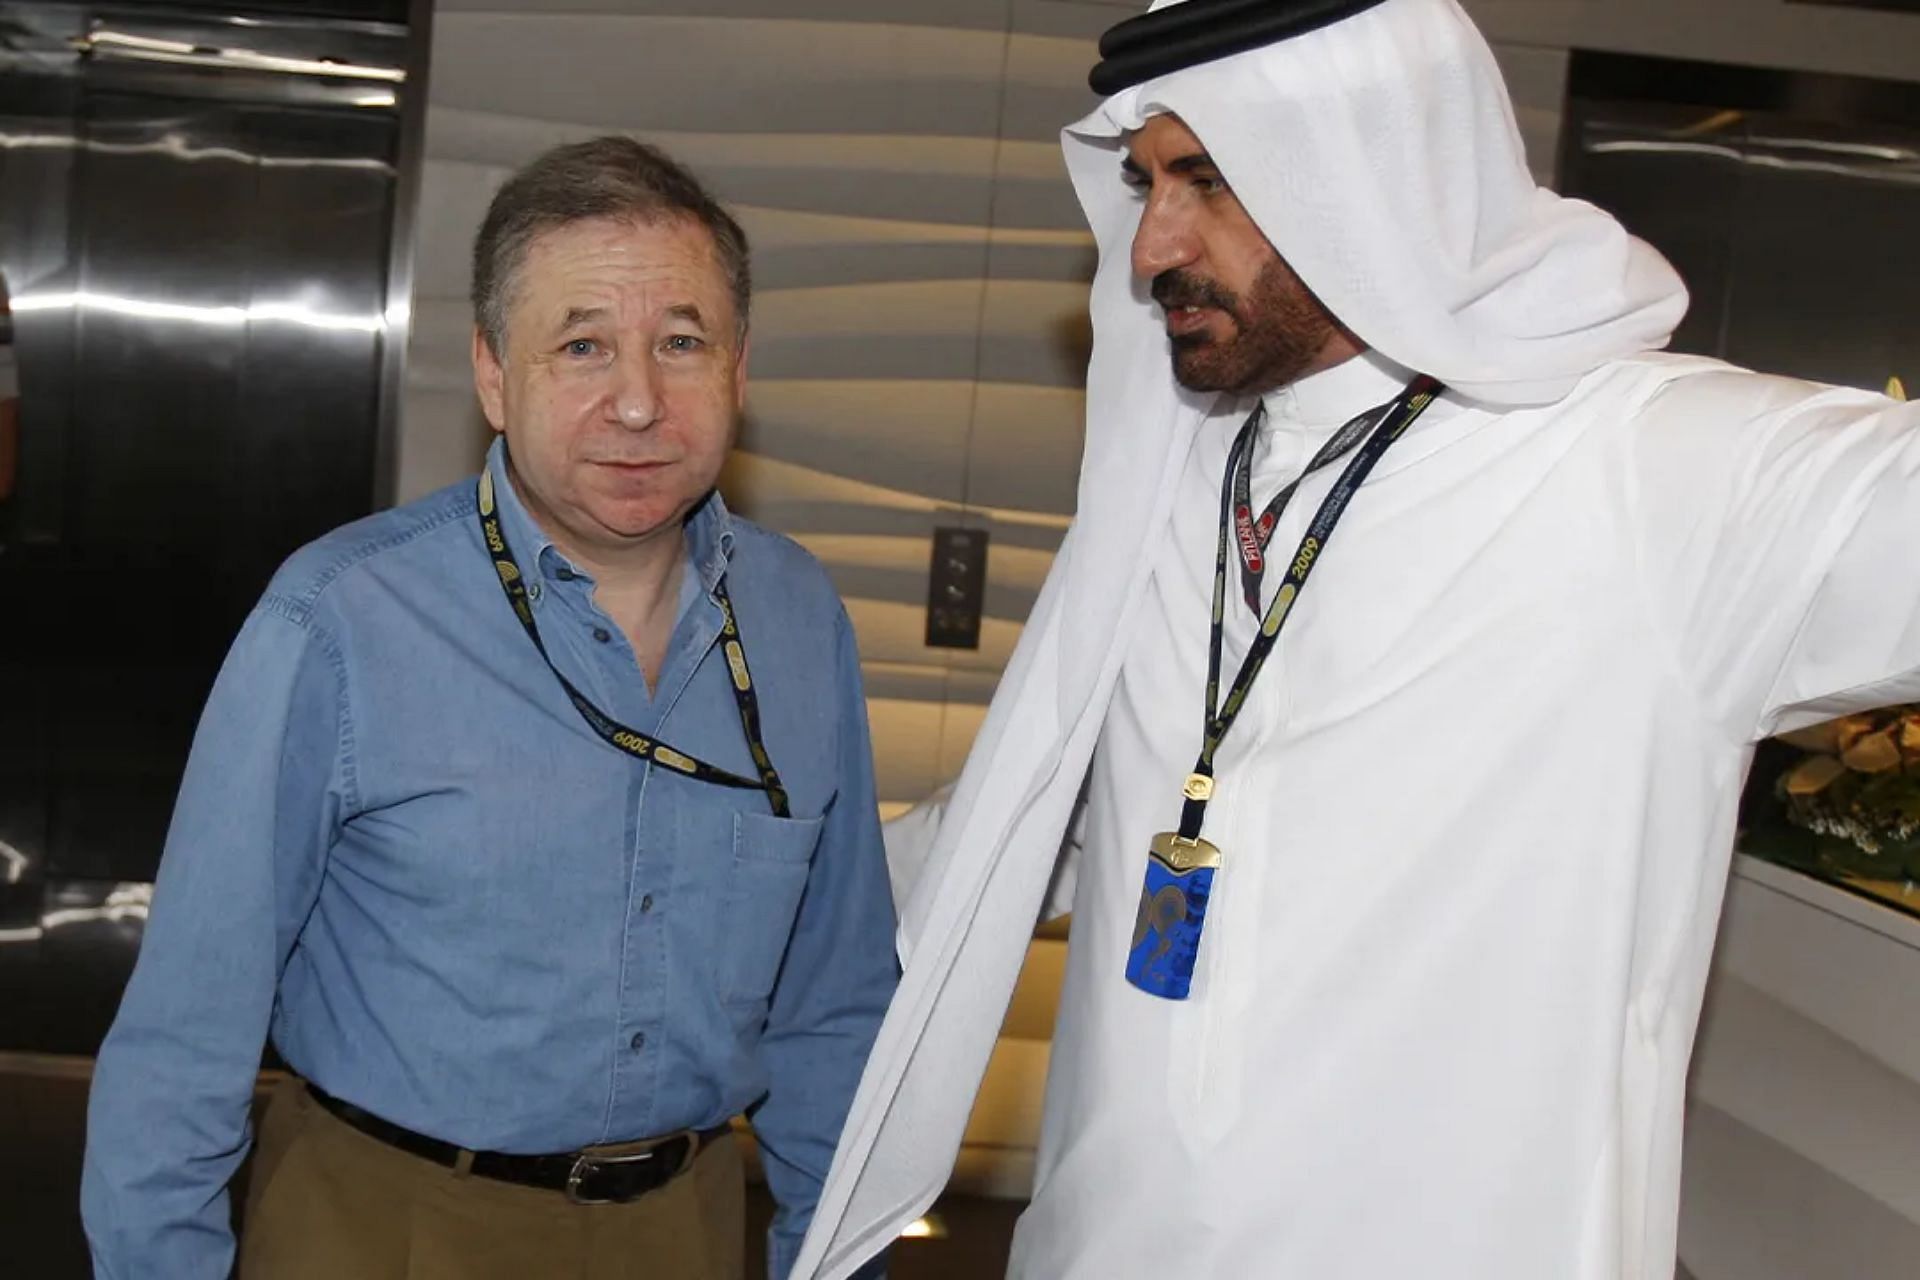 Mohammed Ben Sulayem (R) and Jean Todt (L) (Photo by AP/Luca Bruno)